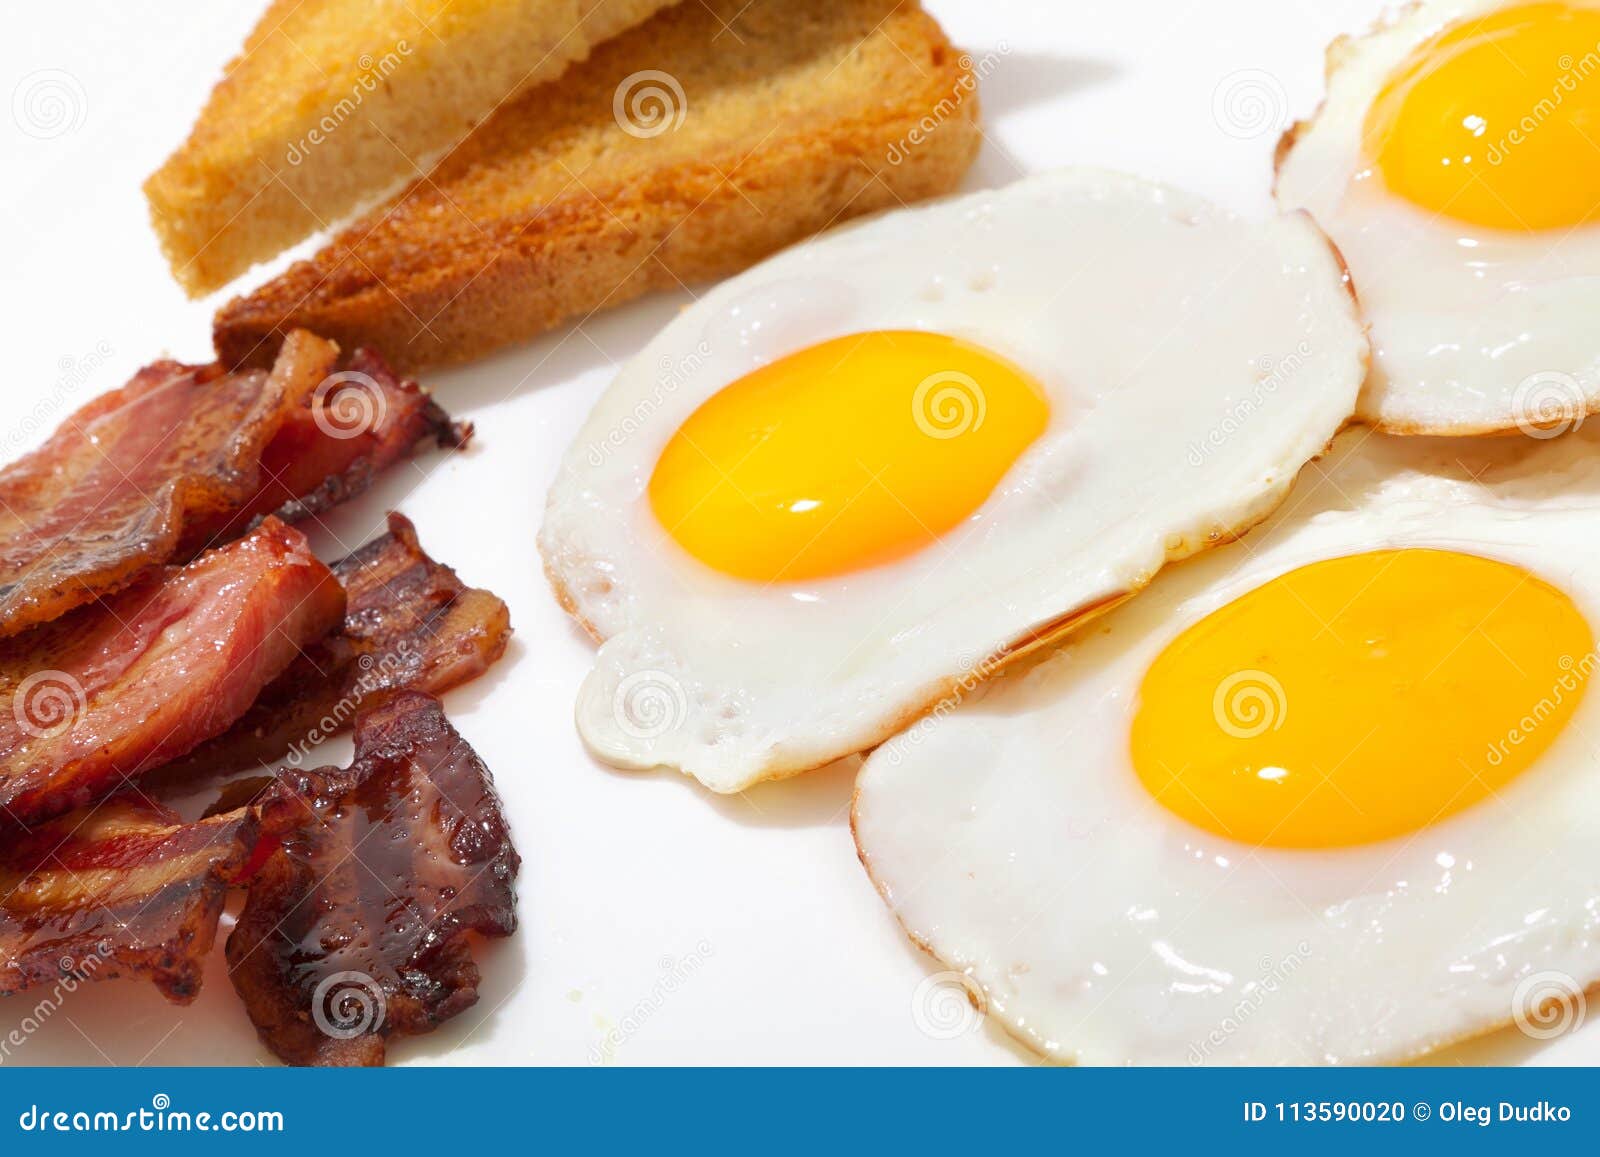 Breakfast Meal Eggs Toast And Bacon Stock Photo Image Of Bacon